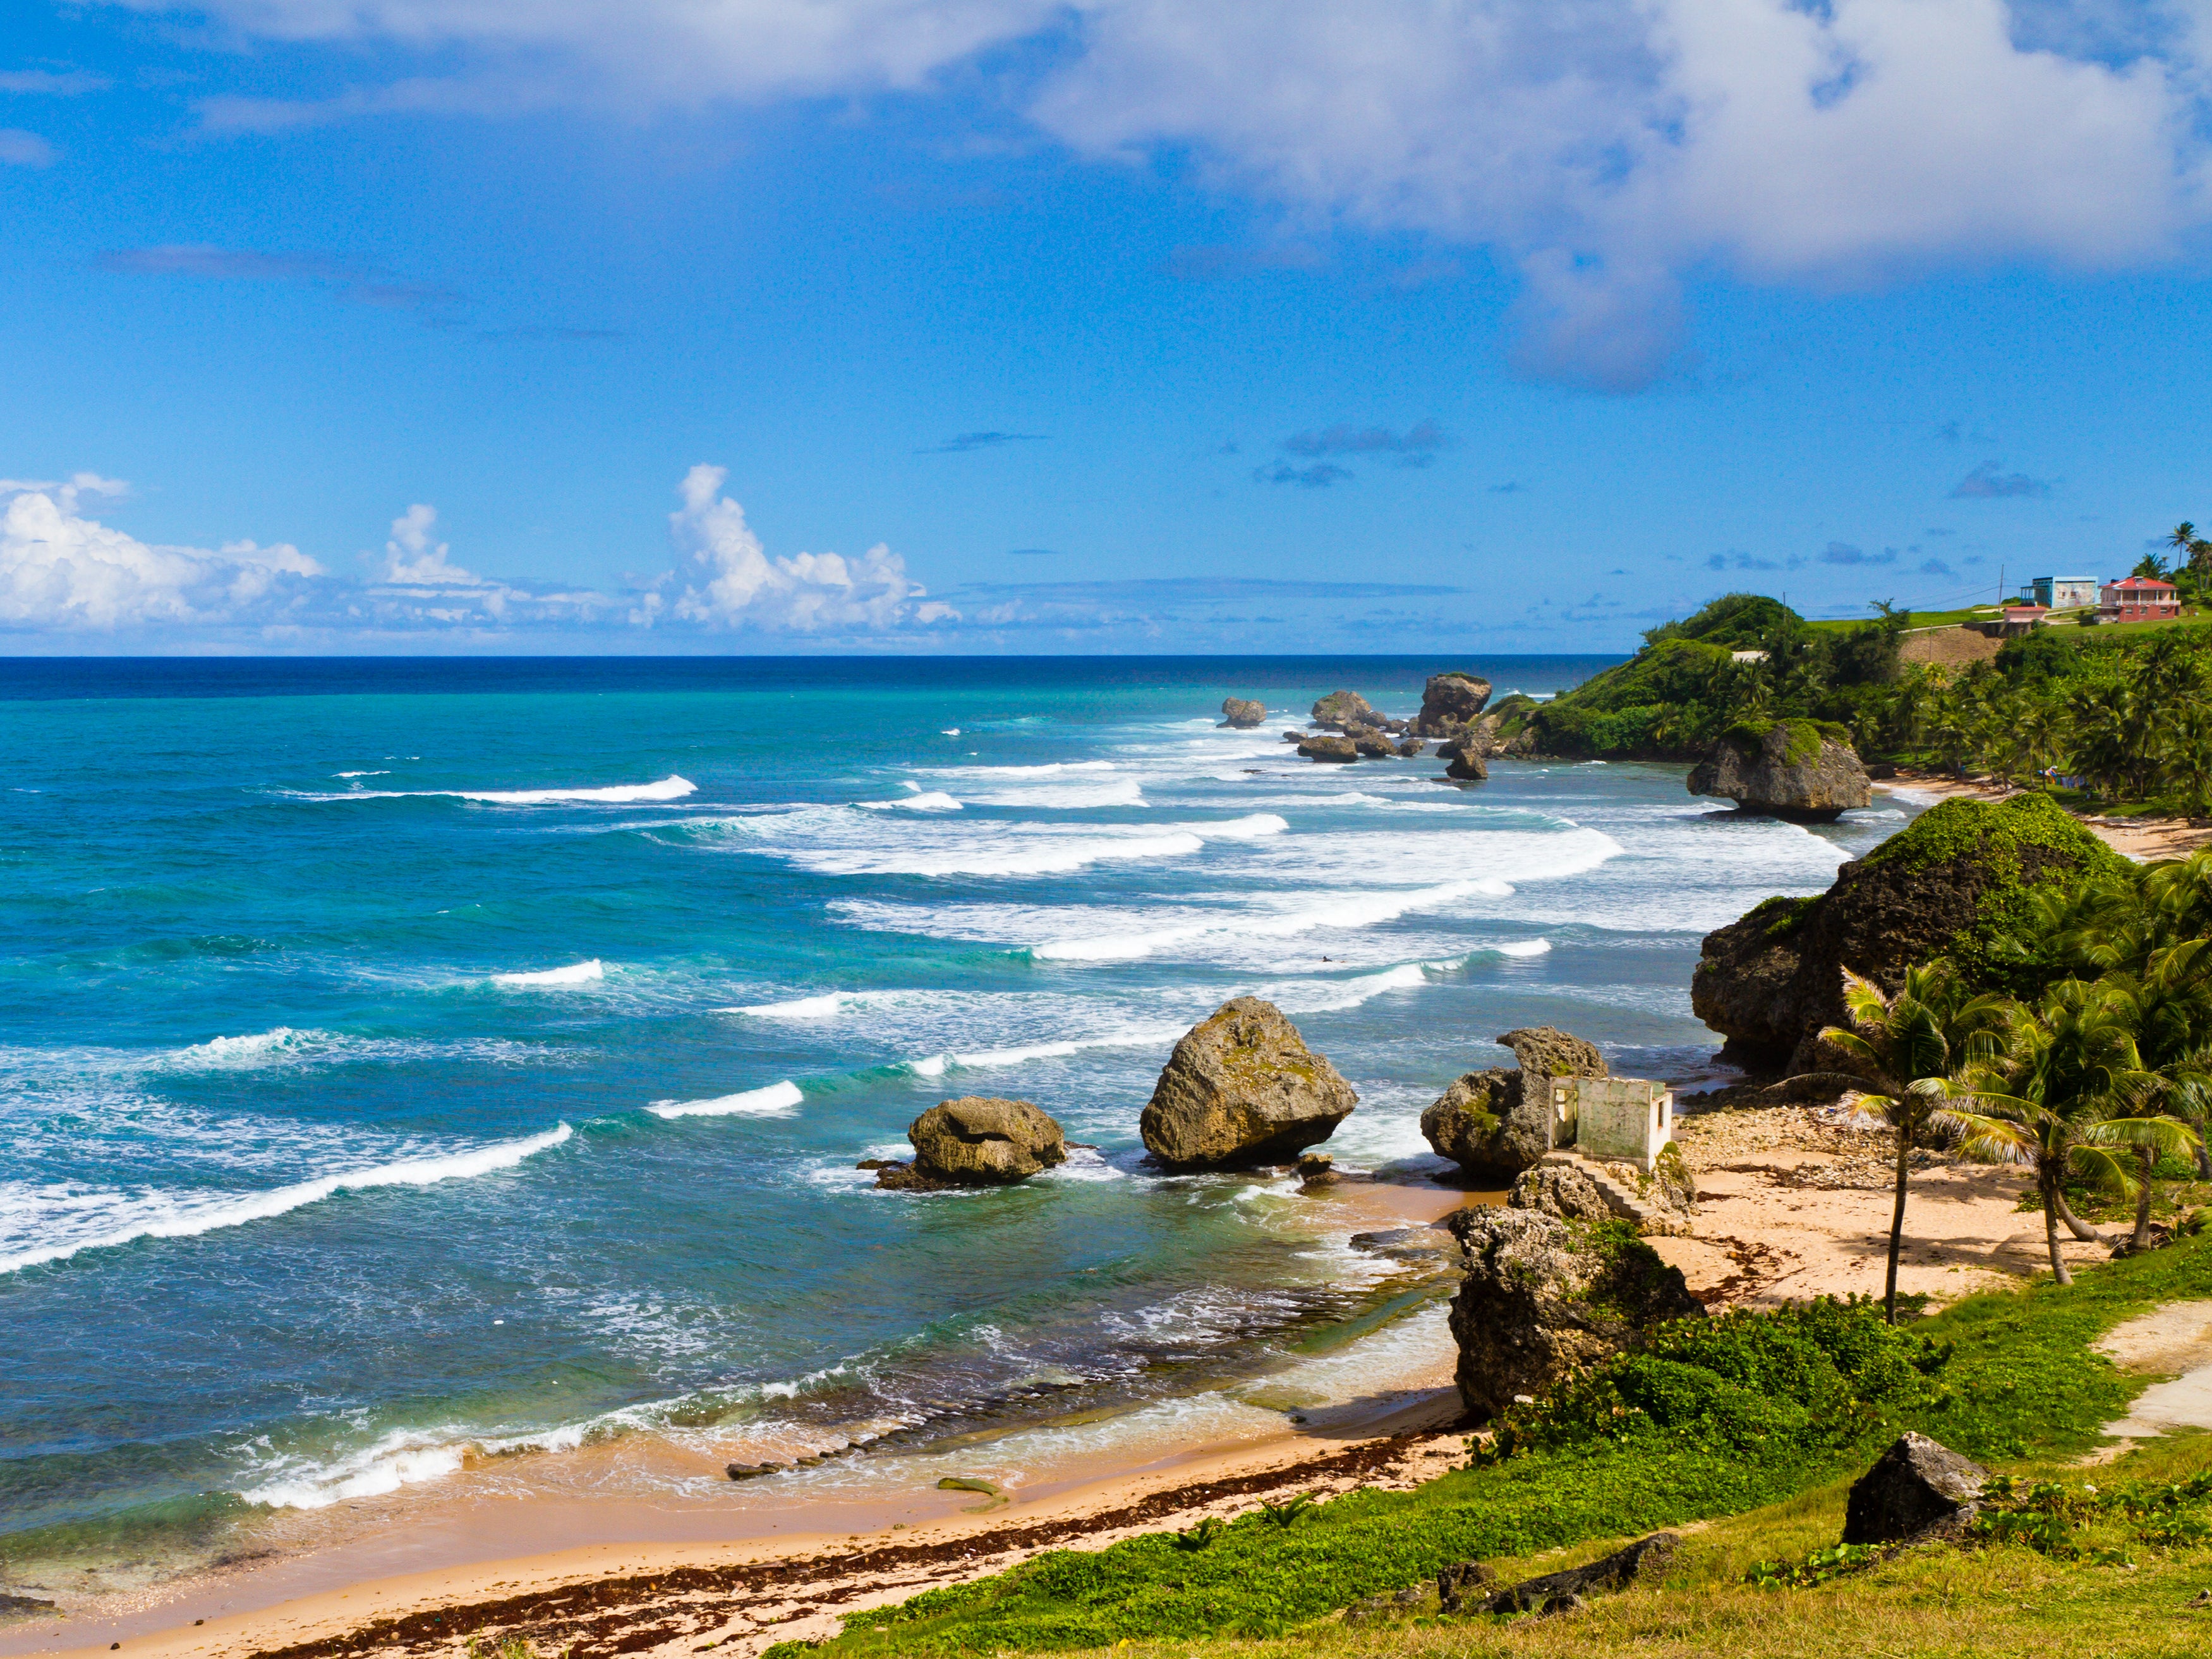 Popular surfing spot Bathsheba can be found on the island’s Atlantic-facing shores